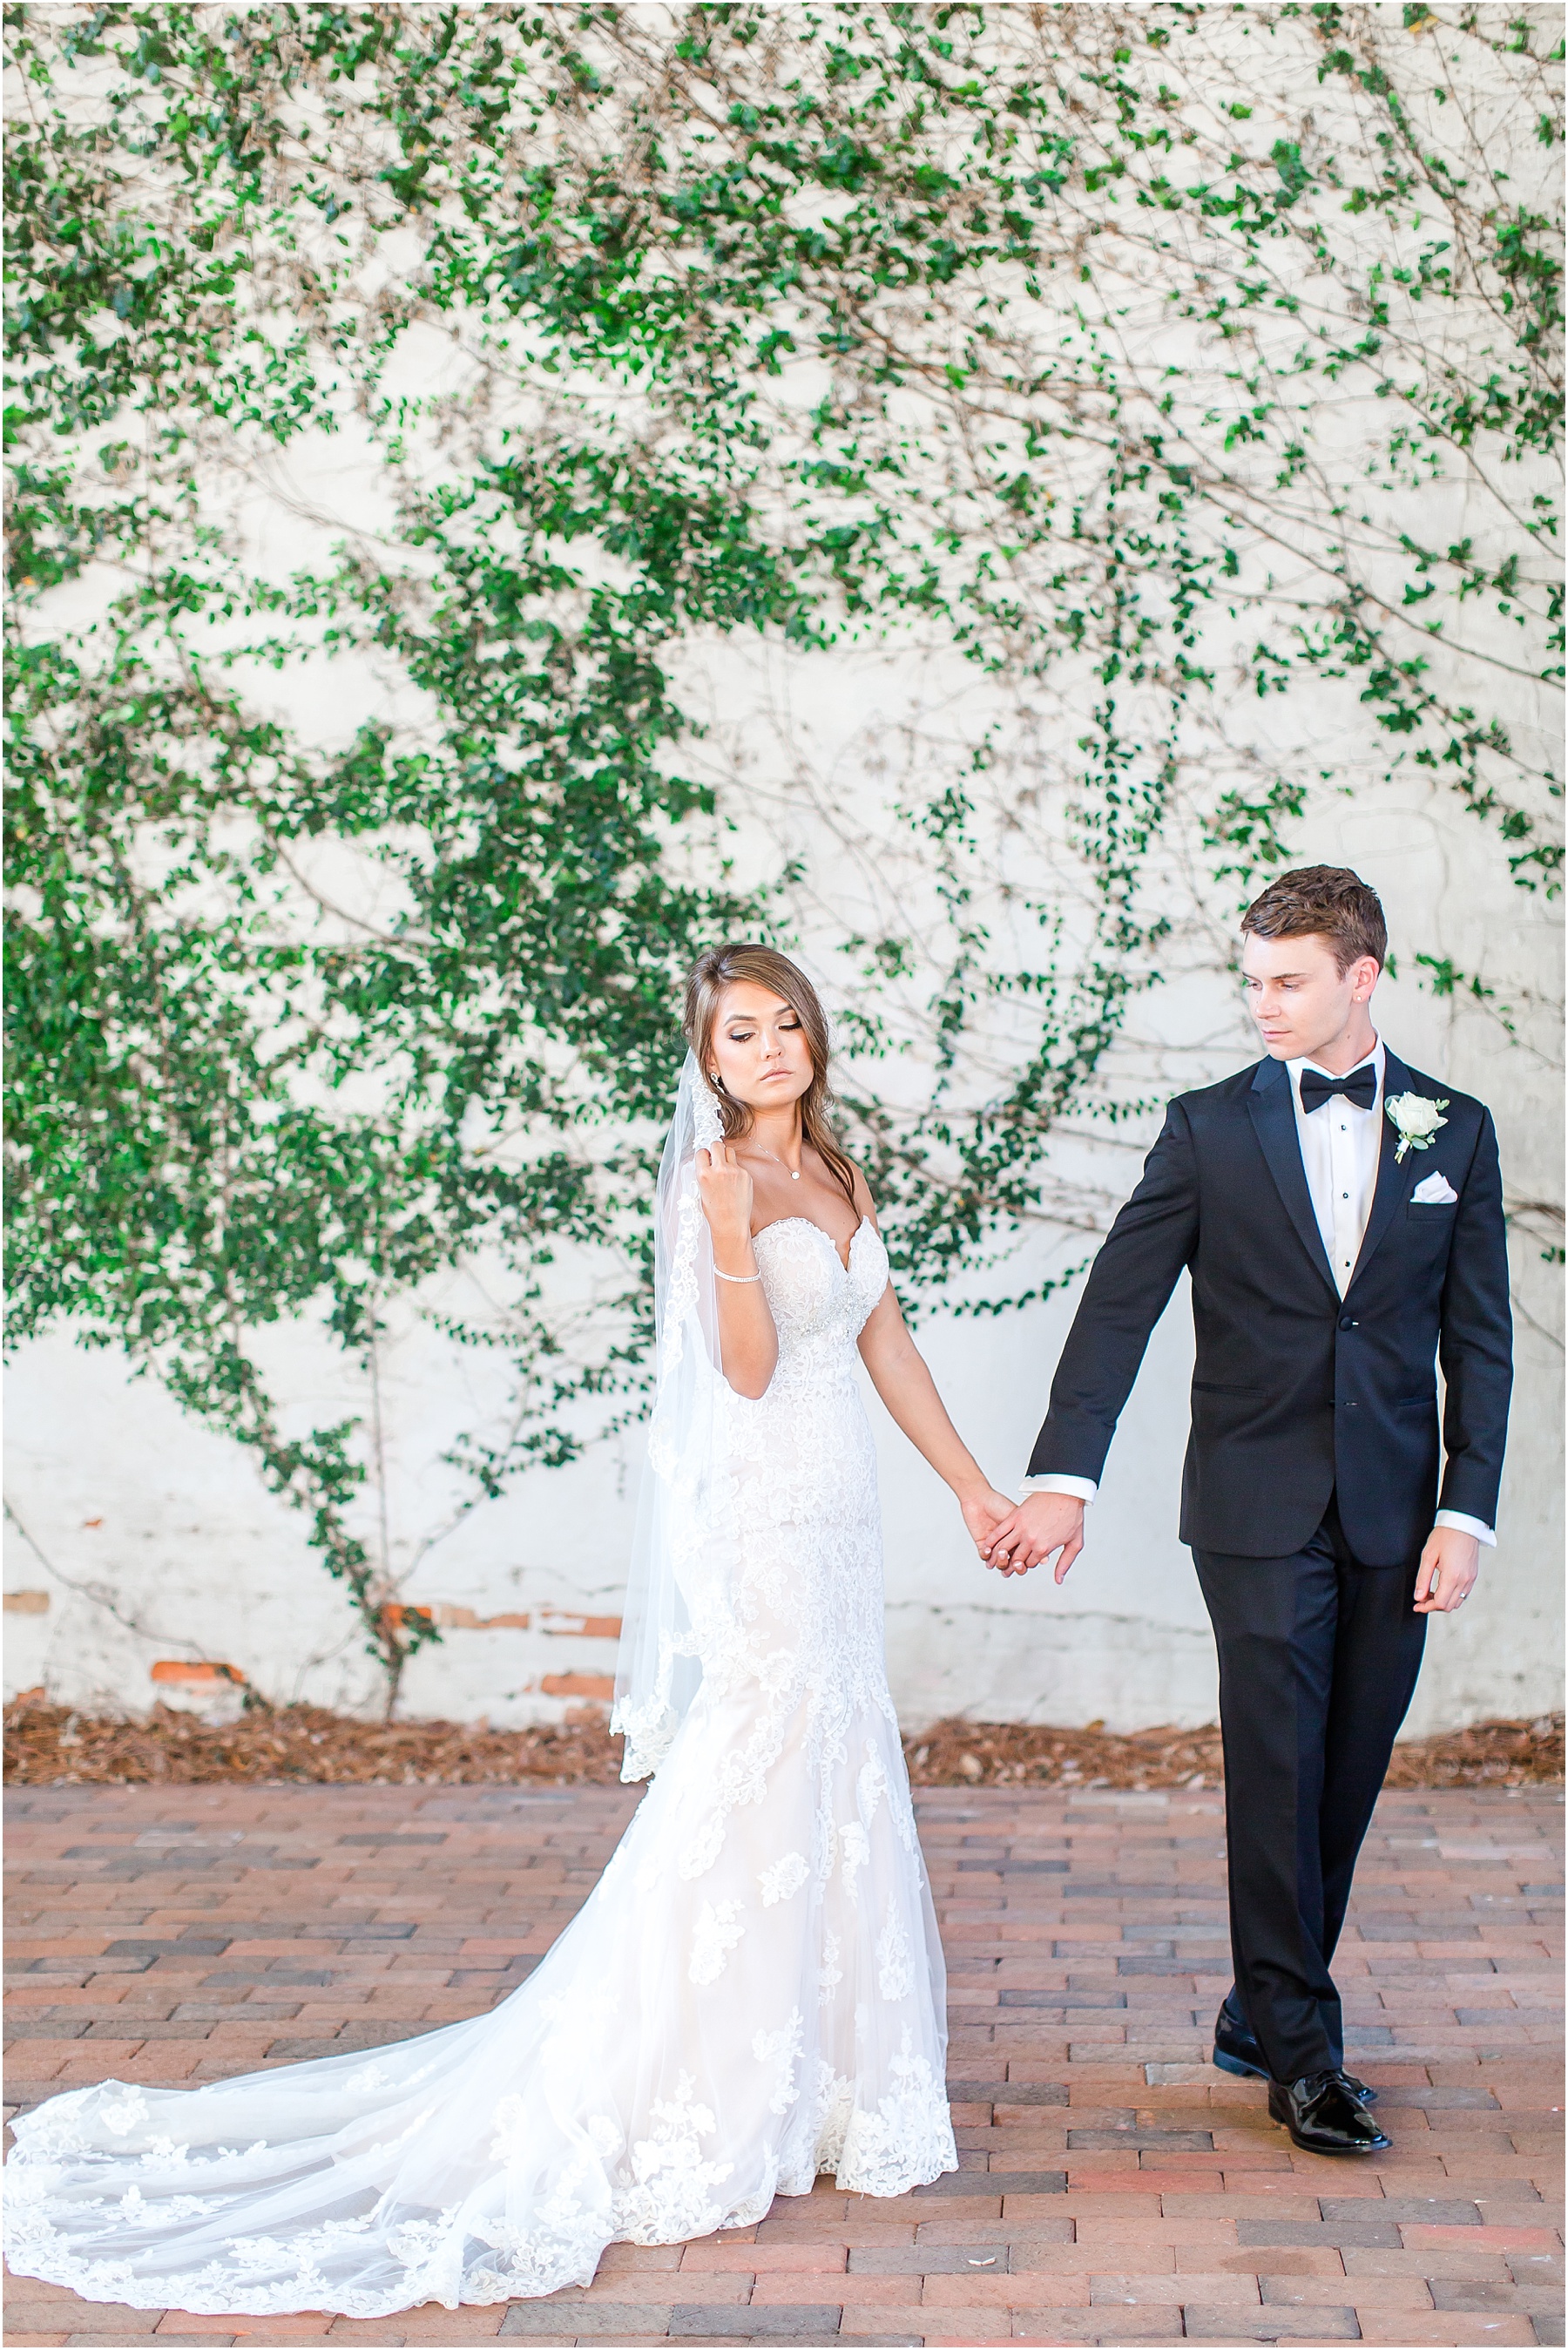 Bakery 105 and The Atrium Downtown Wilmington Wedding Bride and Groom Portraits